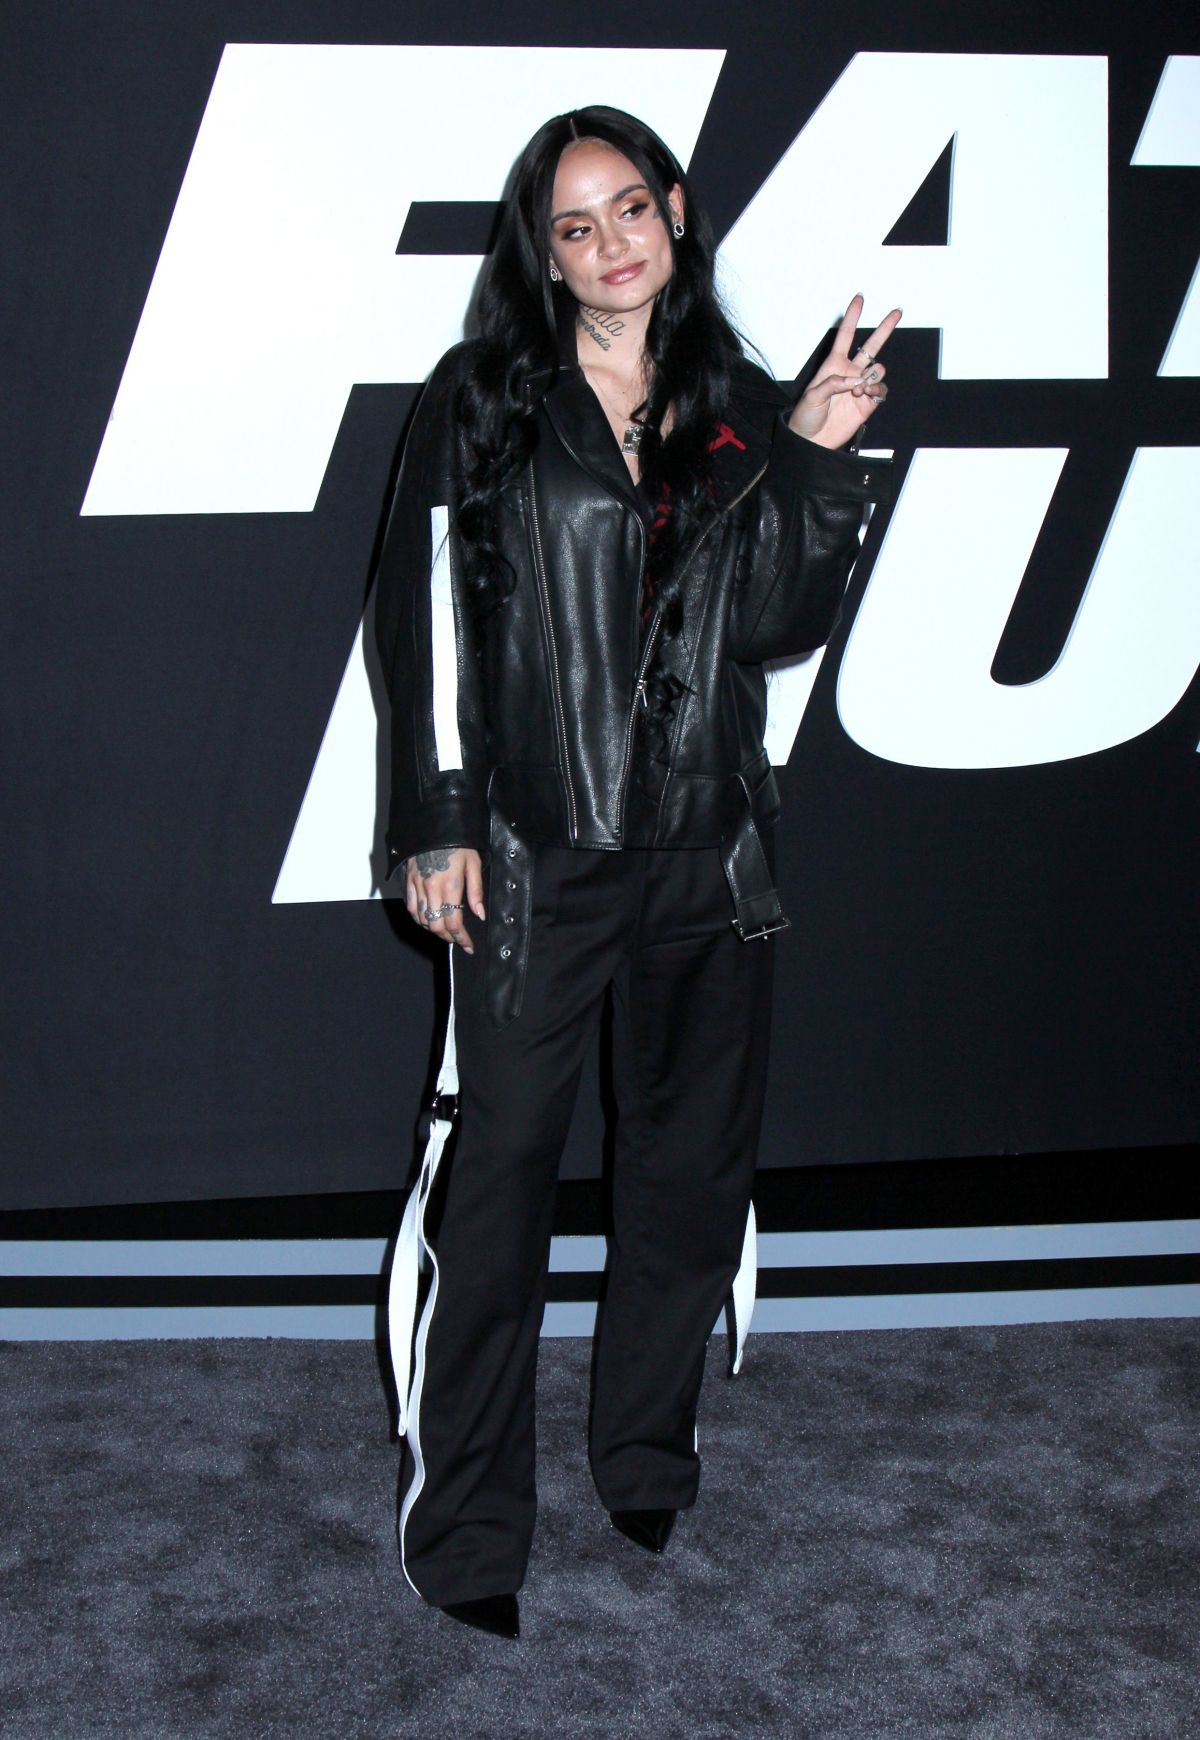 kehlani-at-the-fate-of-the-furious-premiere-in-new-york-04-08-2017_4.jpg